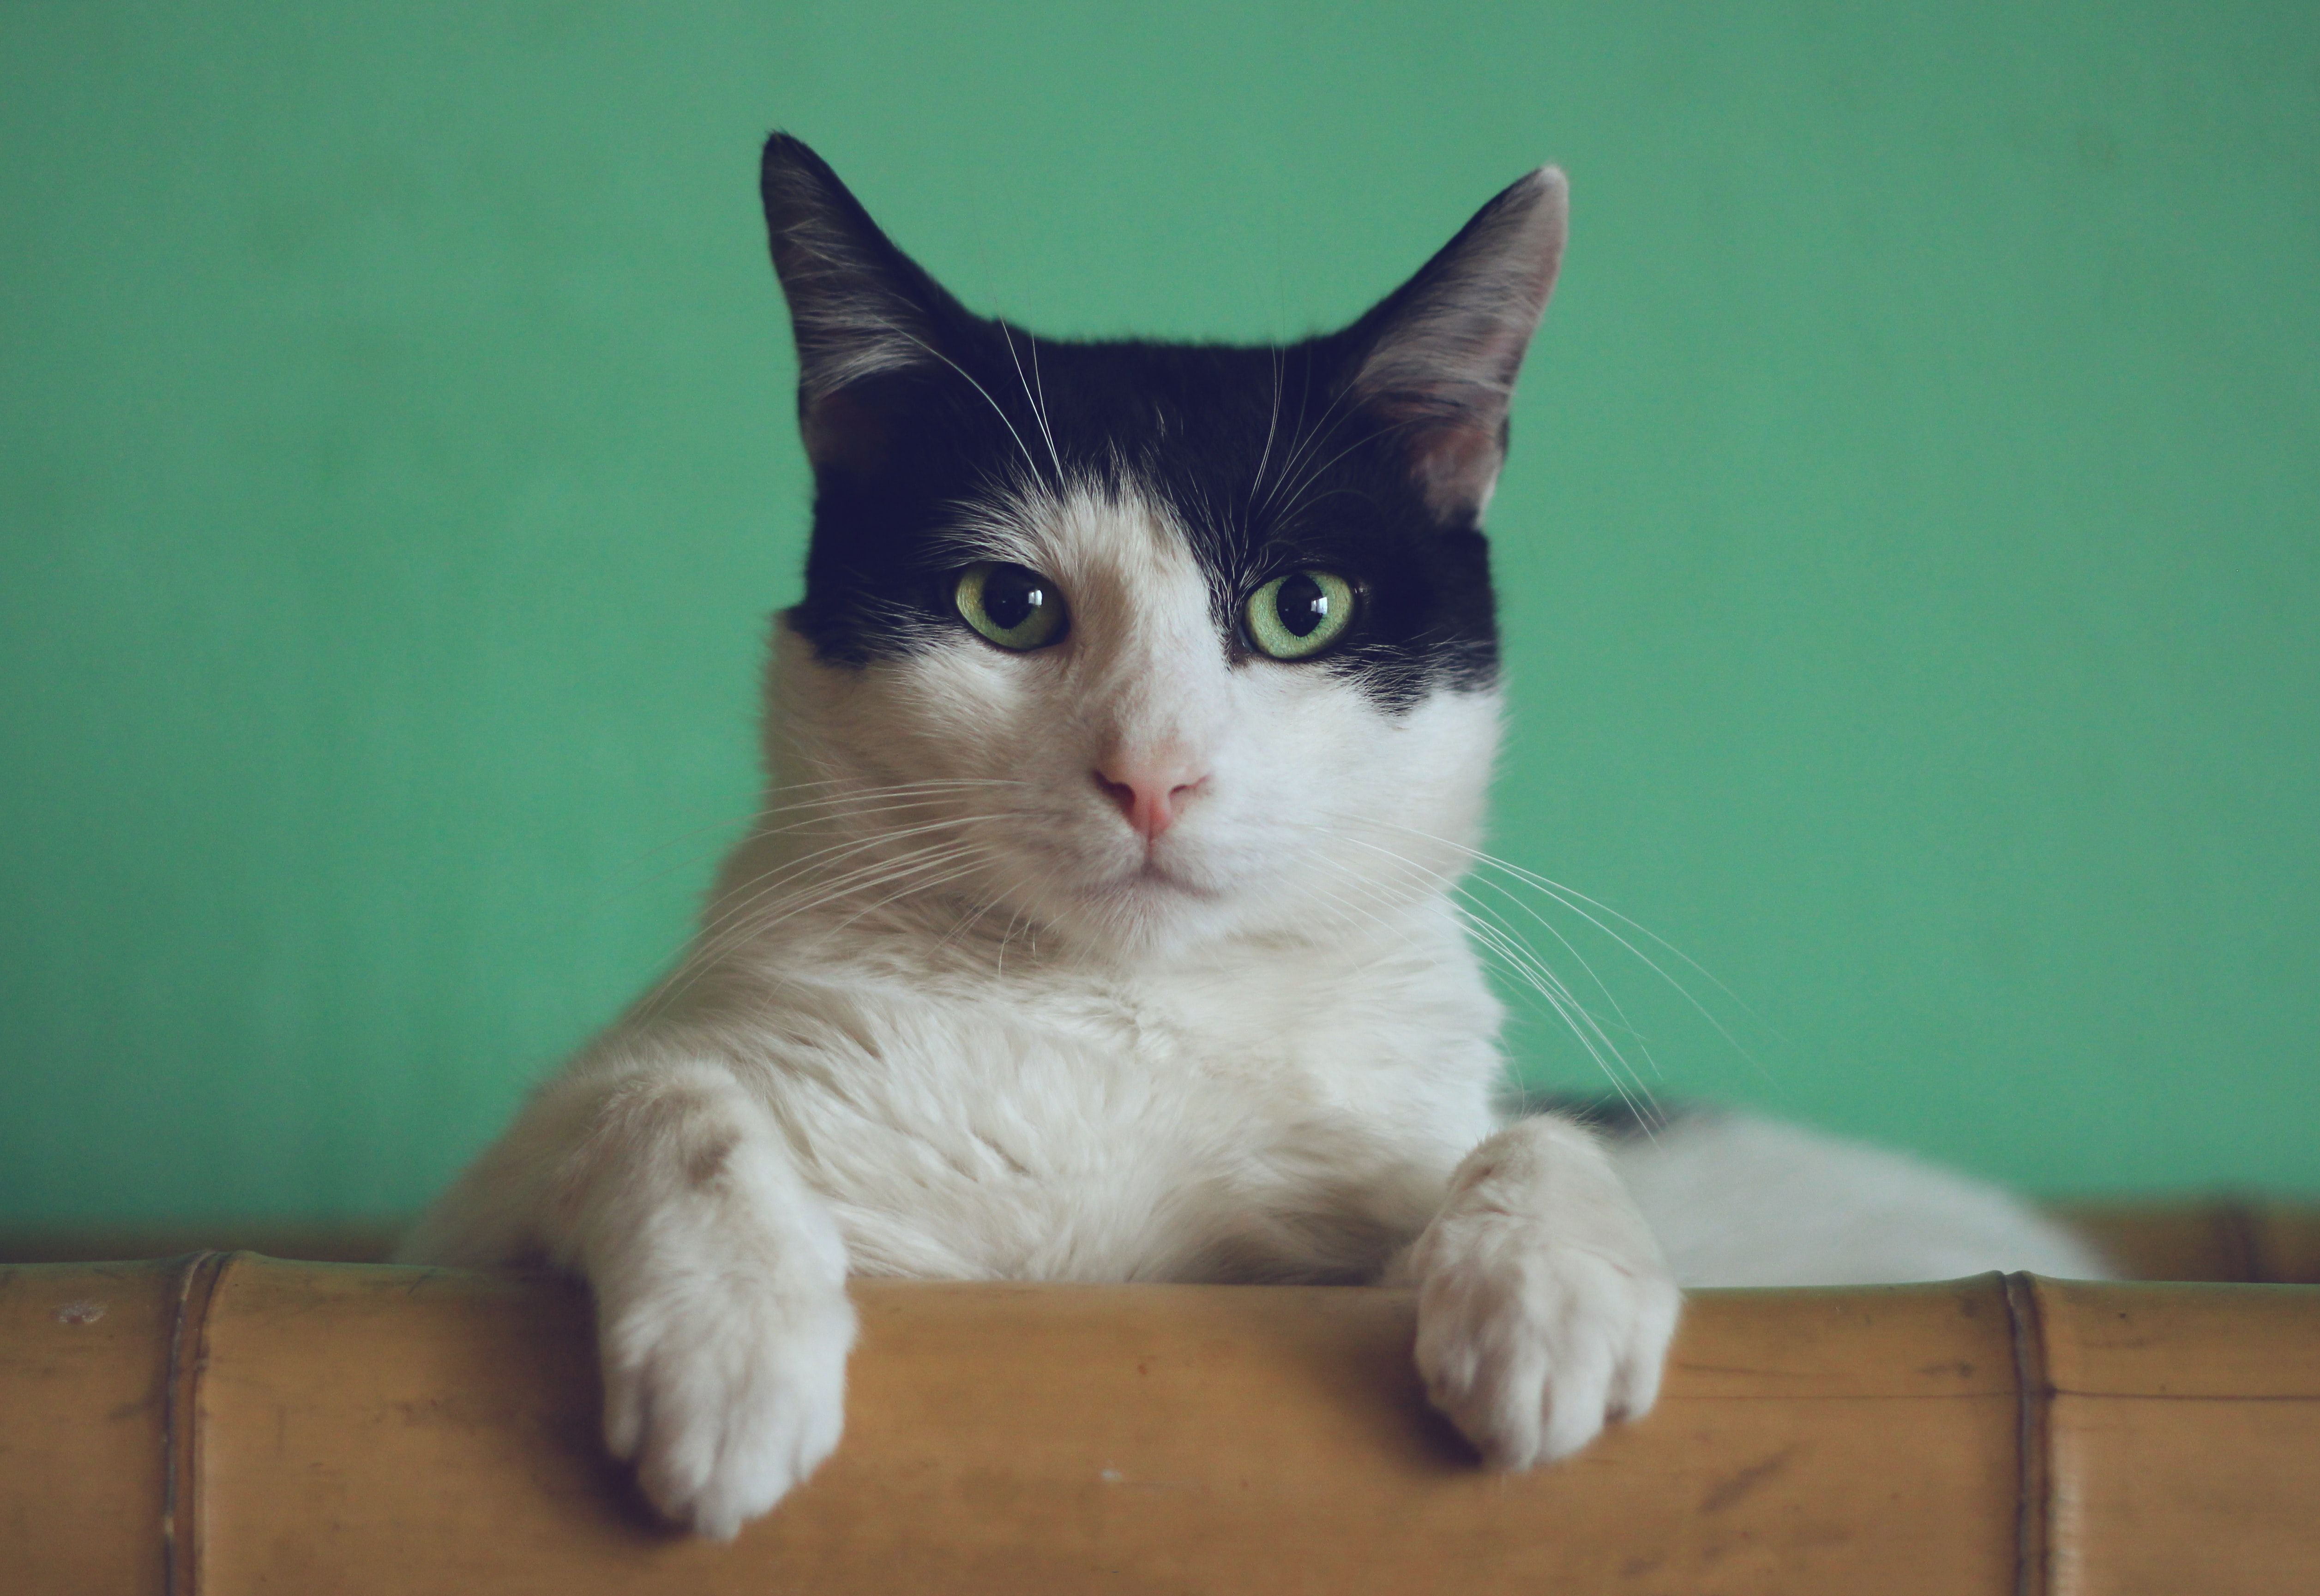 A white and black cat with green eyes looking at the camera